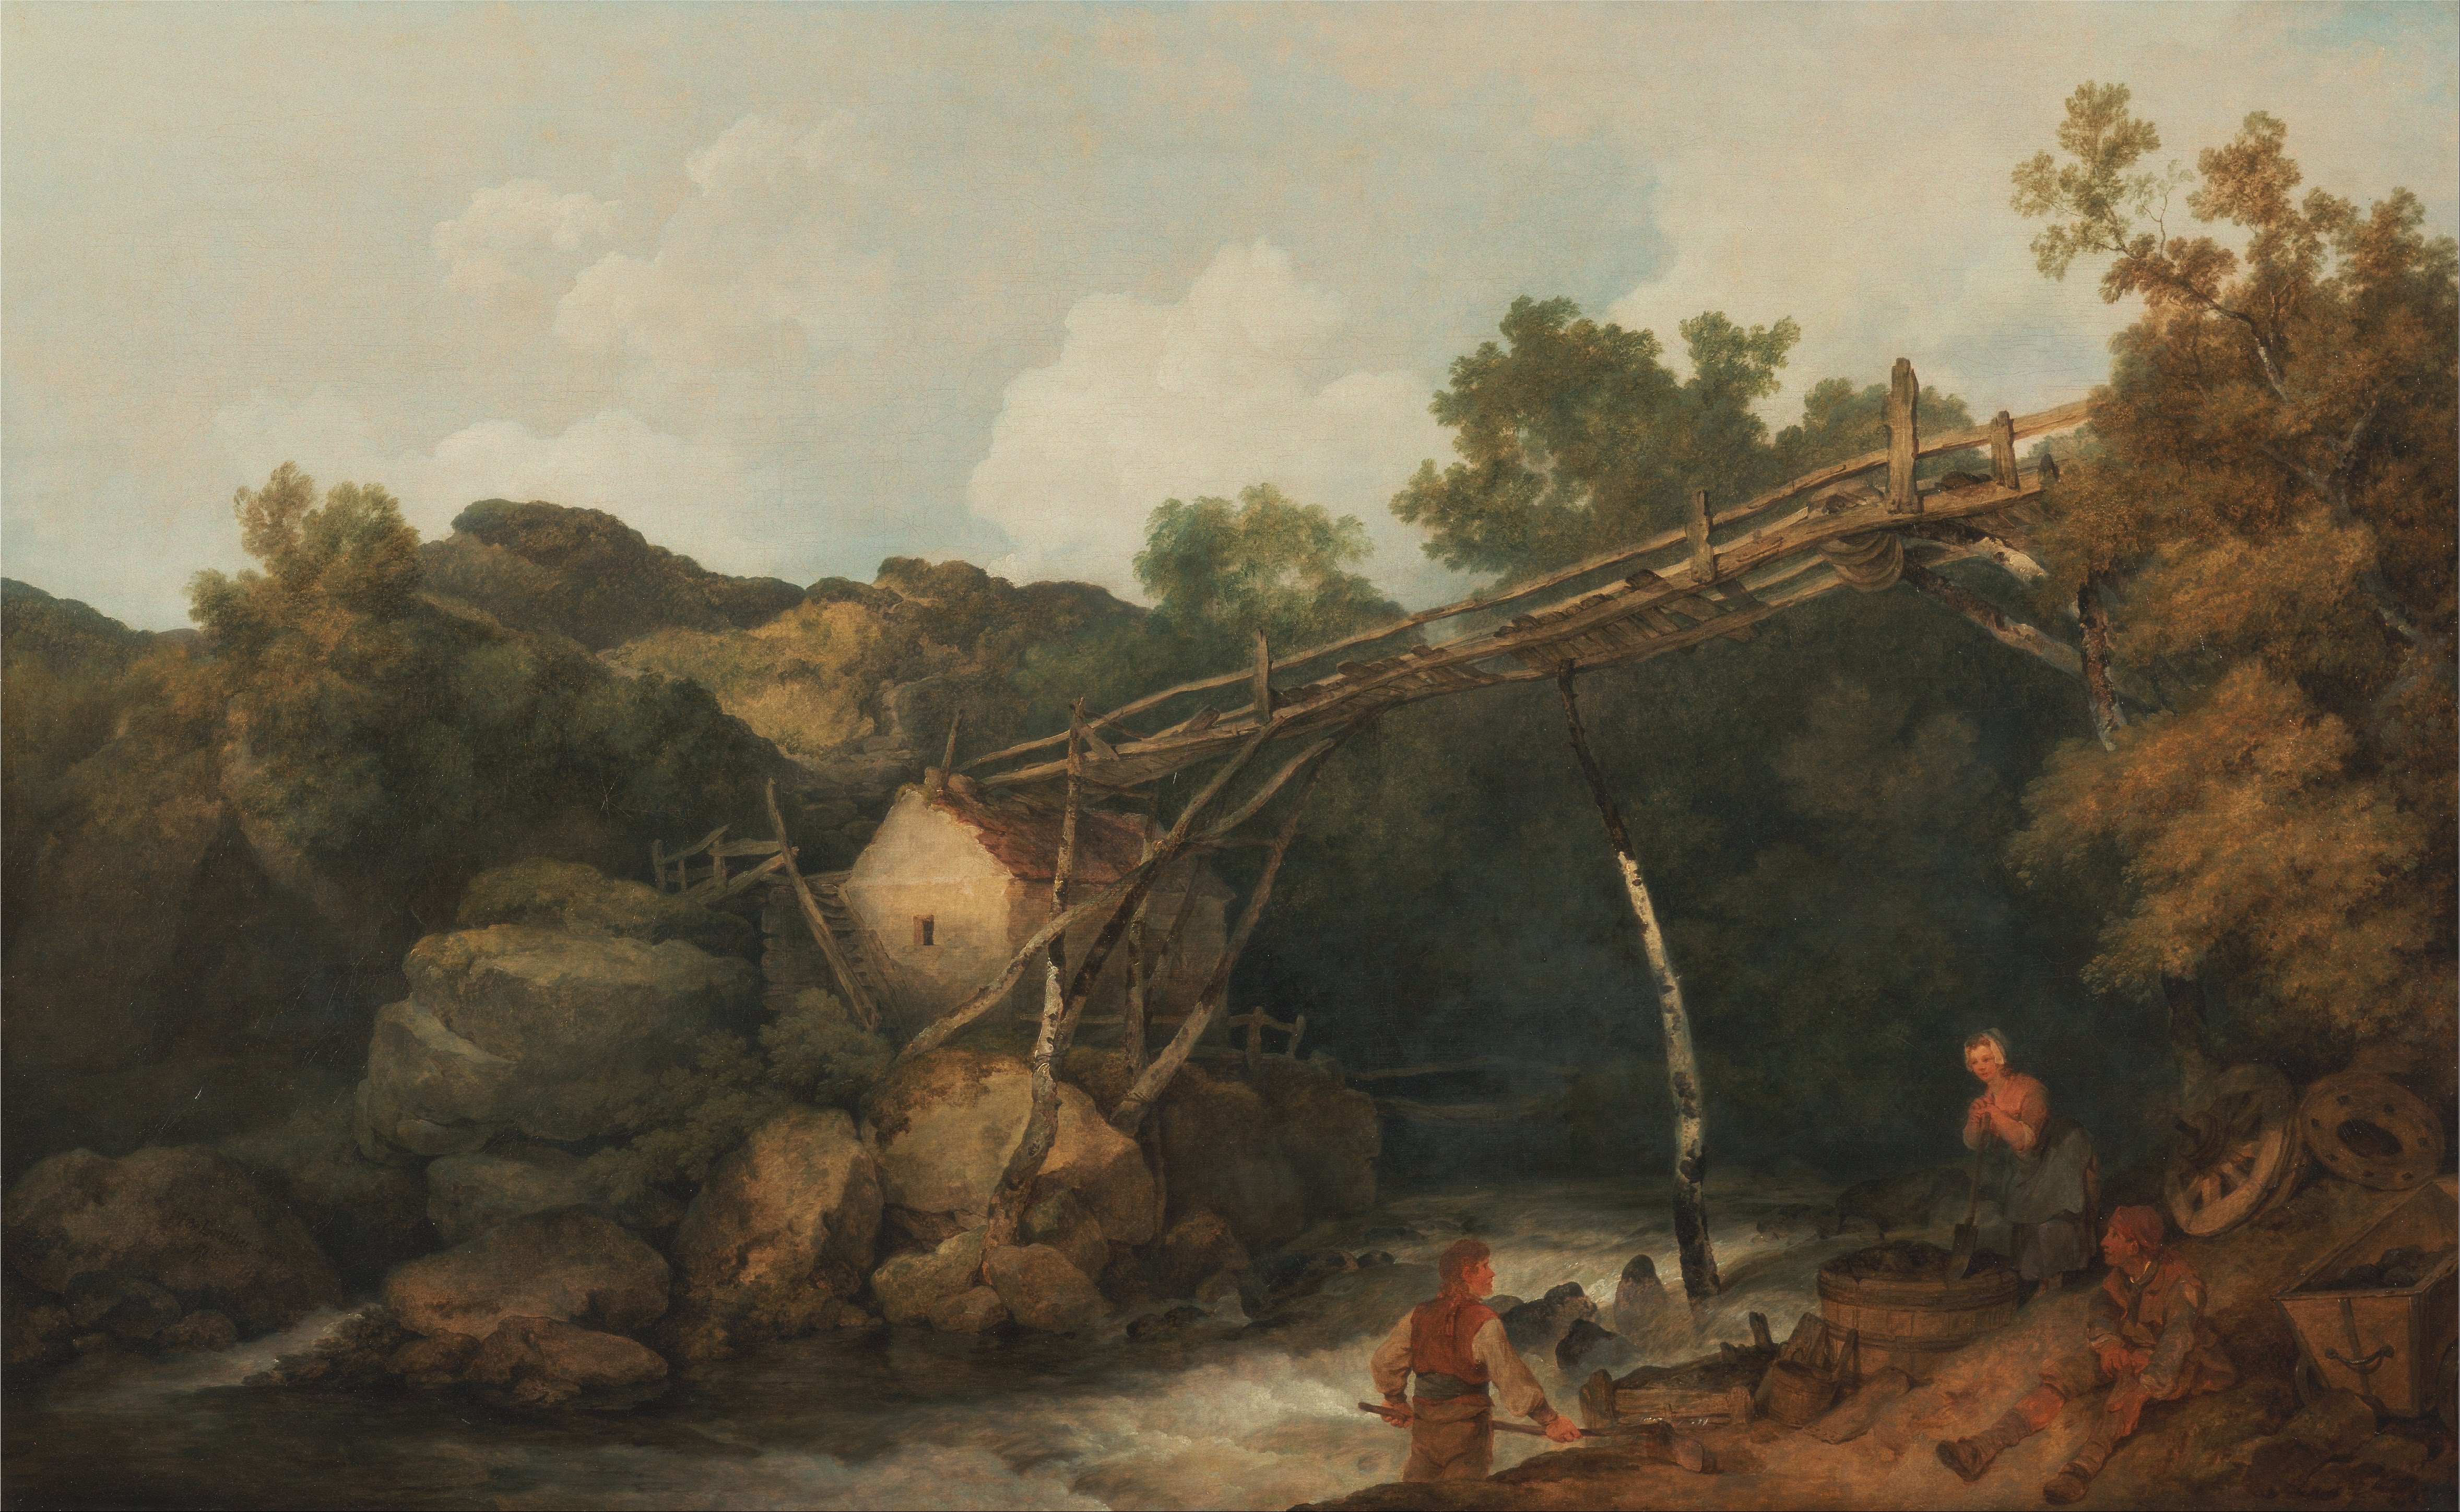 Philippe-Jacques_de_Loutherbourg_-_A_View_near_Matlock,_Derbyshire_with_Figures_Working_beneath_a_Wooden_Conveyor